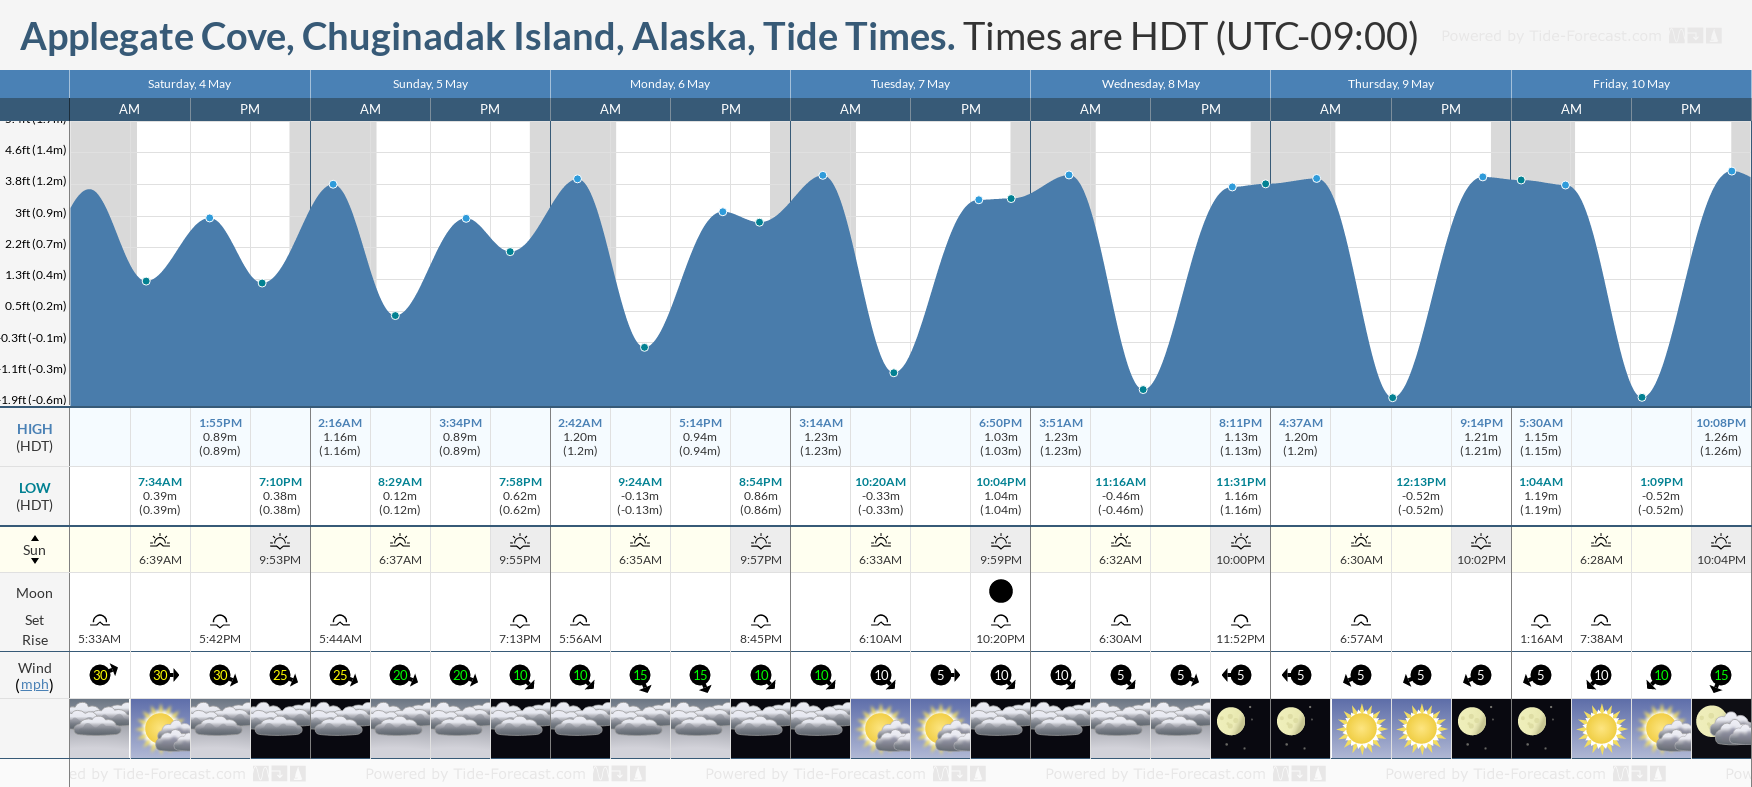 Applegate Cove, Chuginadak Island, Alaska Tide Chart including high and low tide tide times for the next 7 days